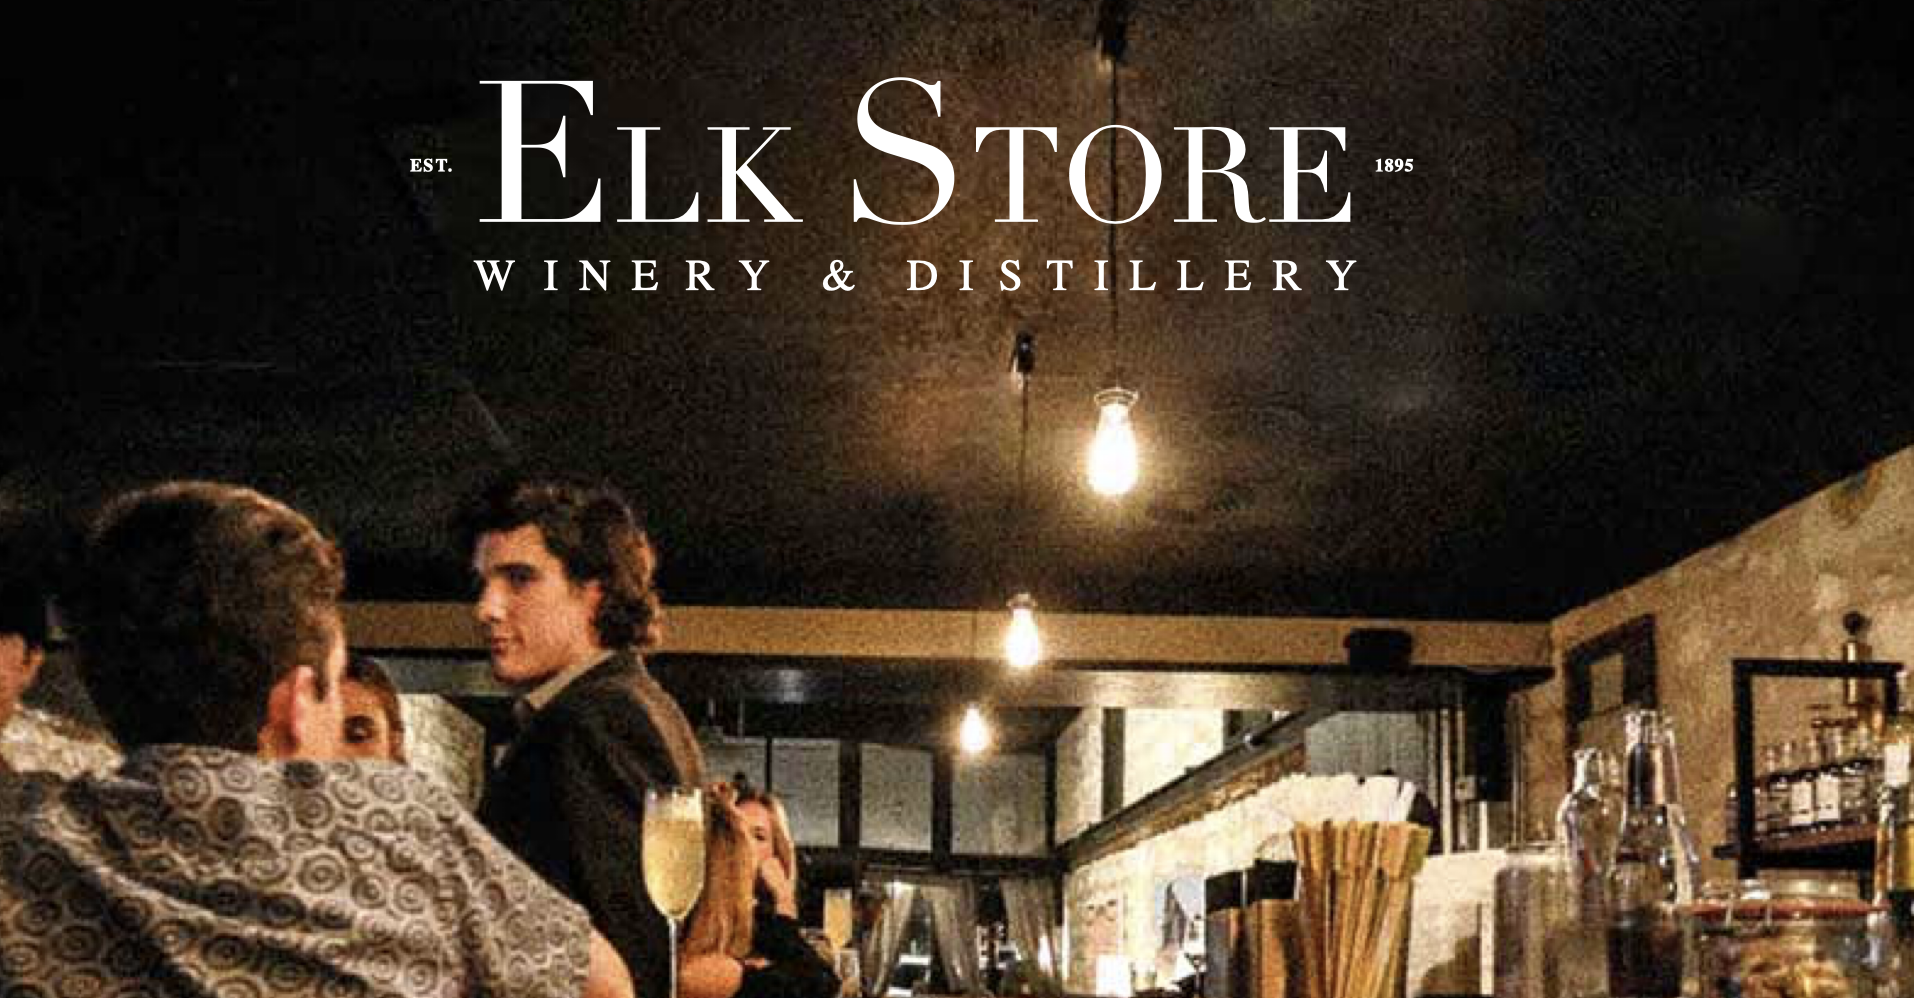 Craft Cocktails at the Elk Store